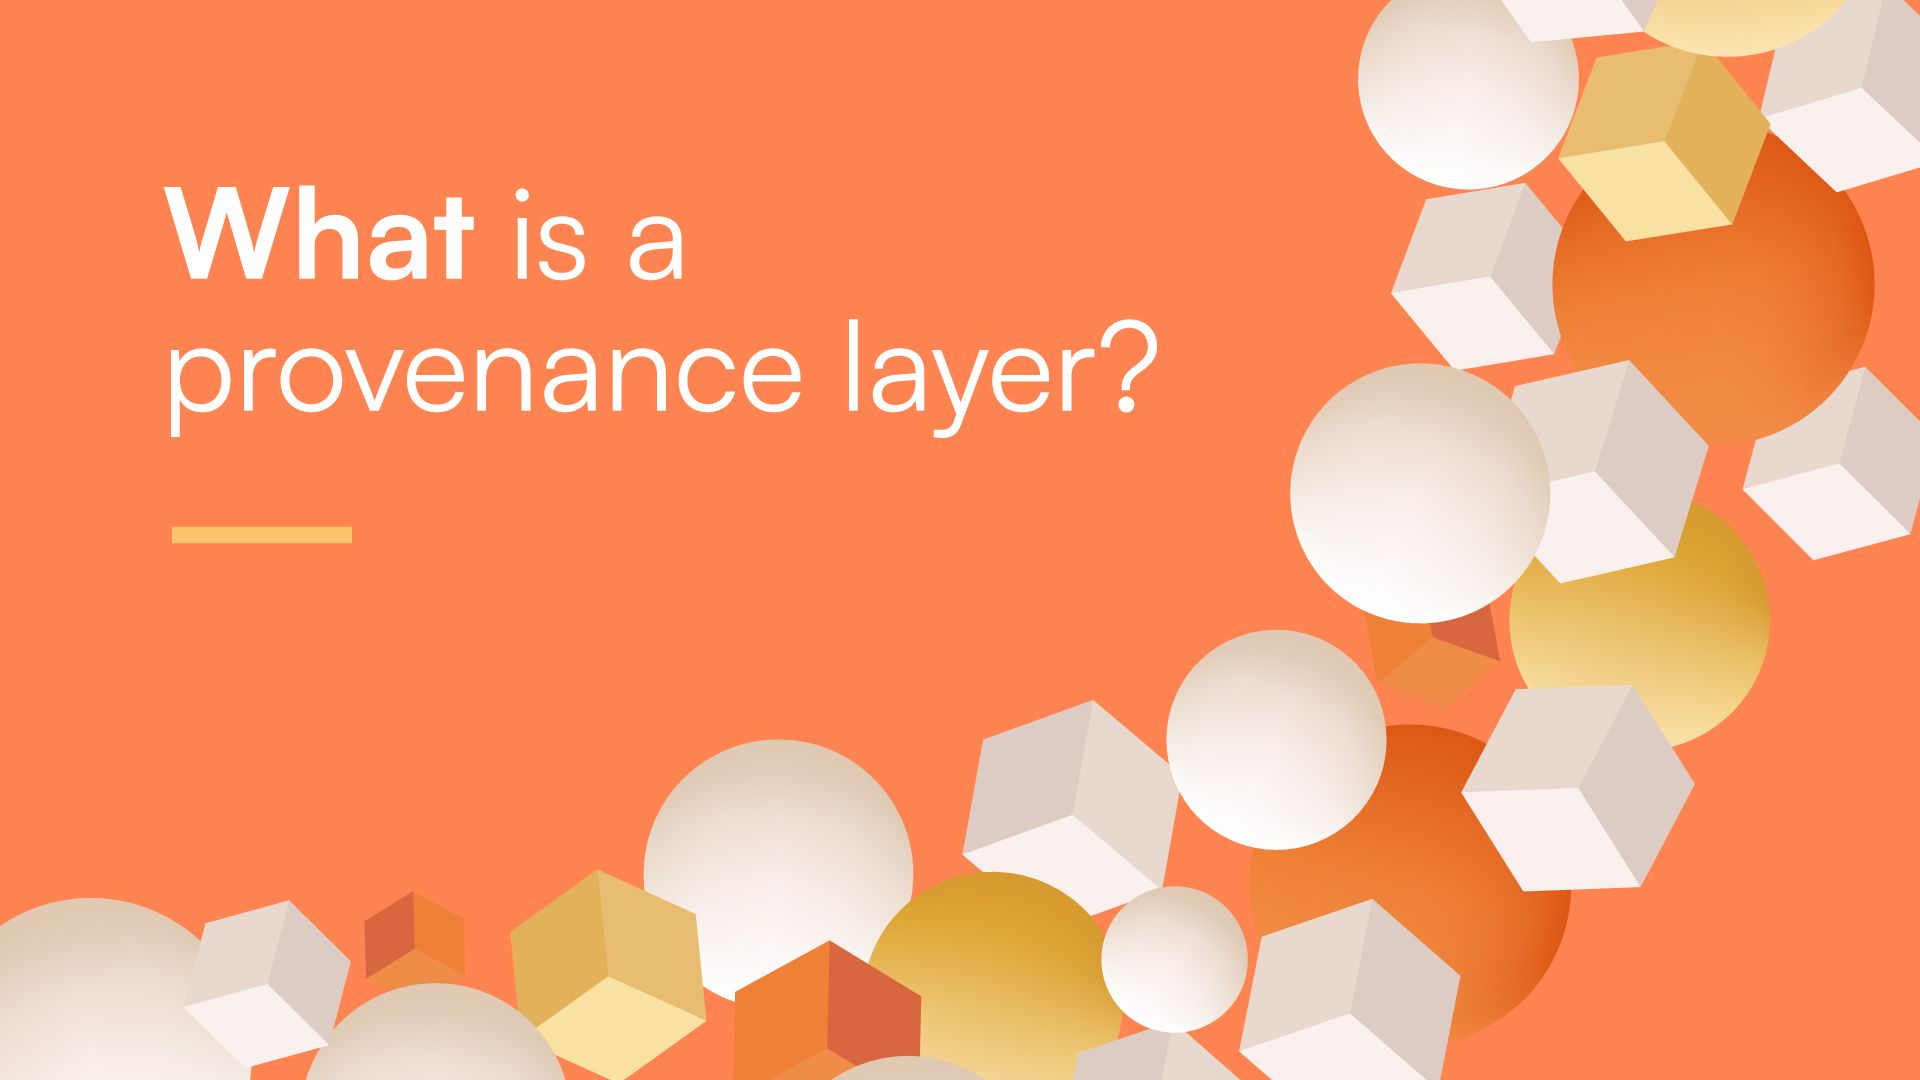 What is a provenance layer?